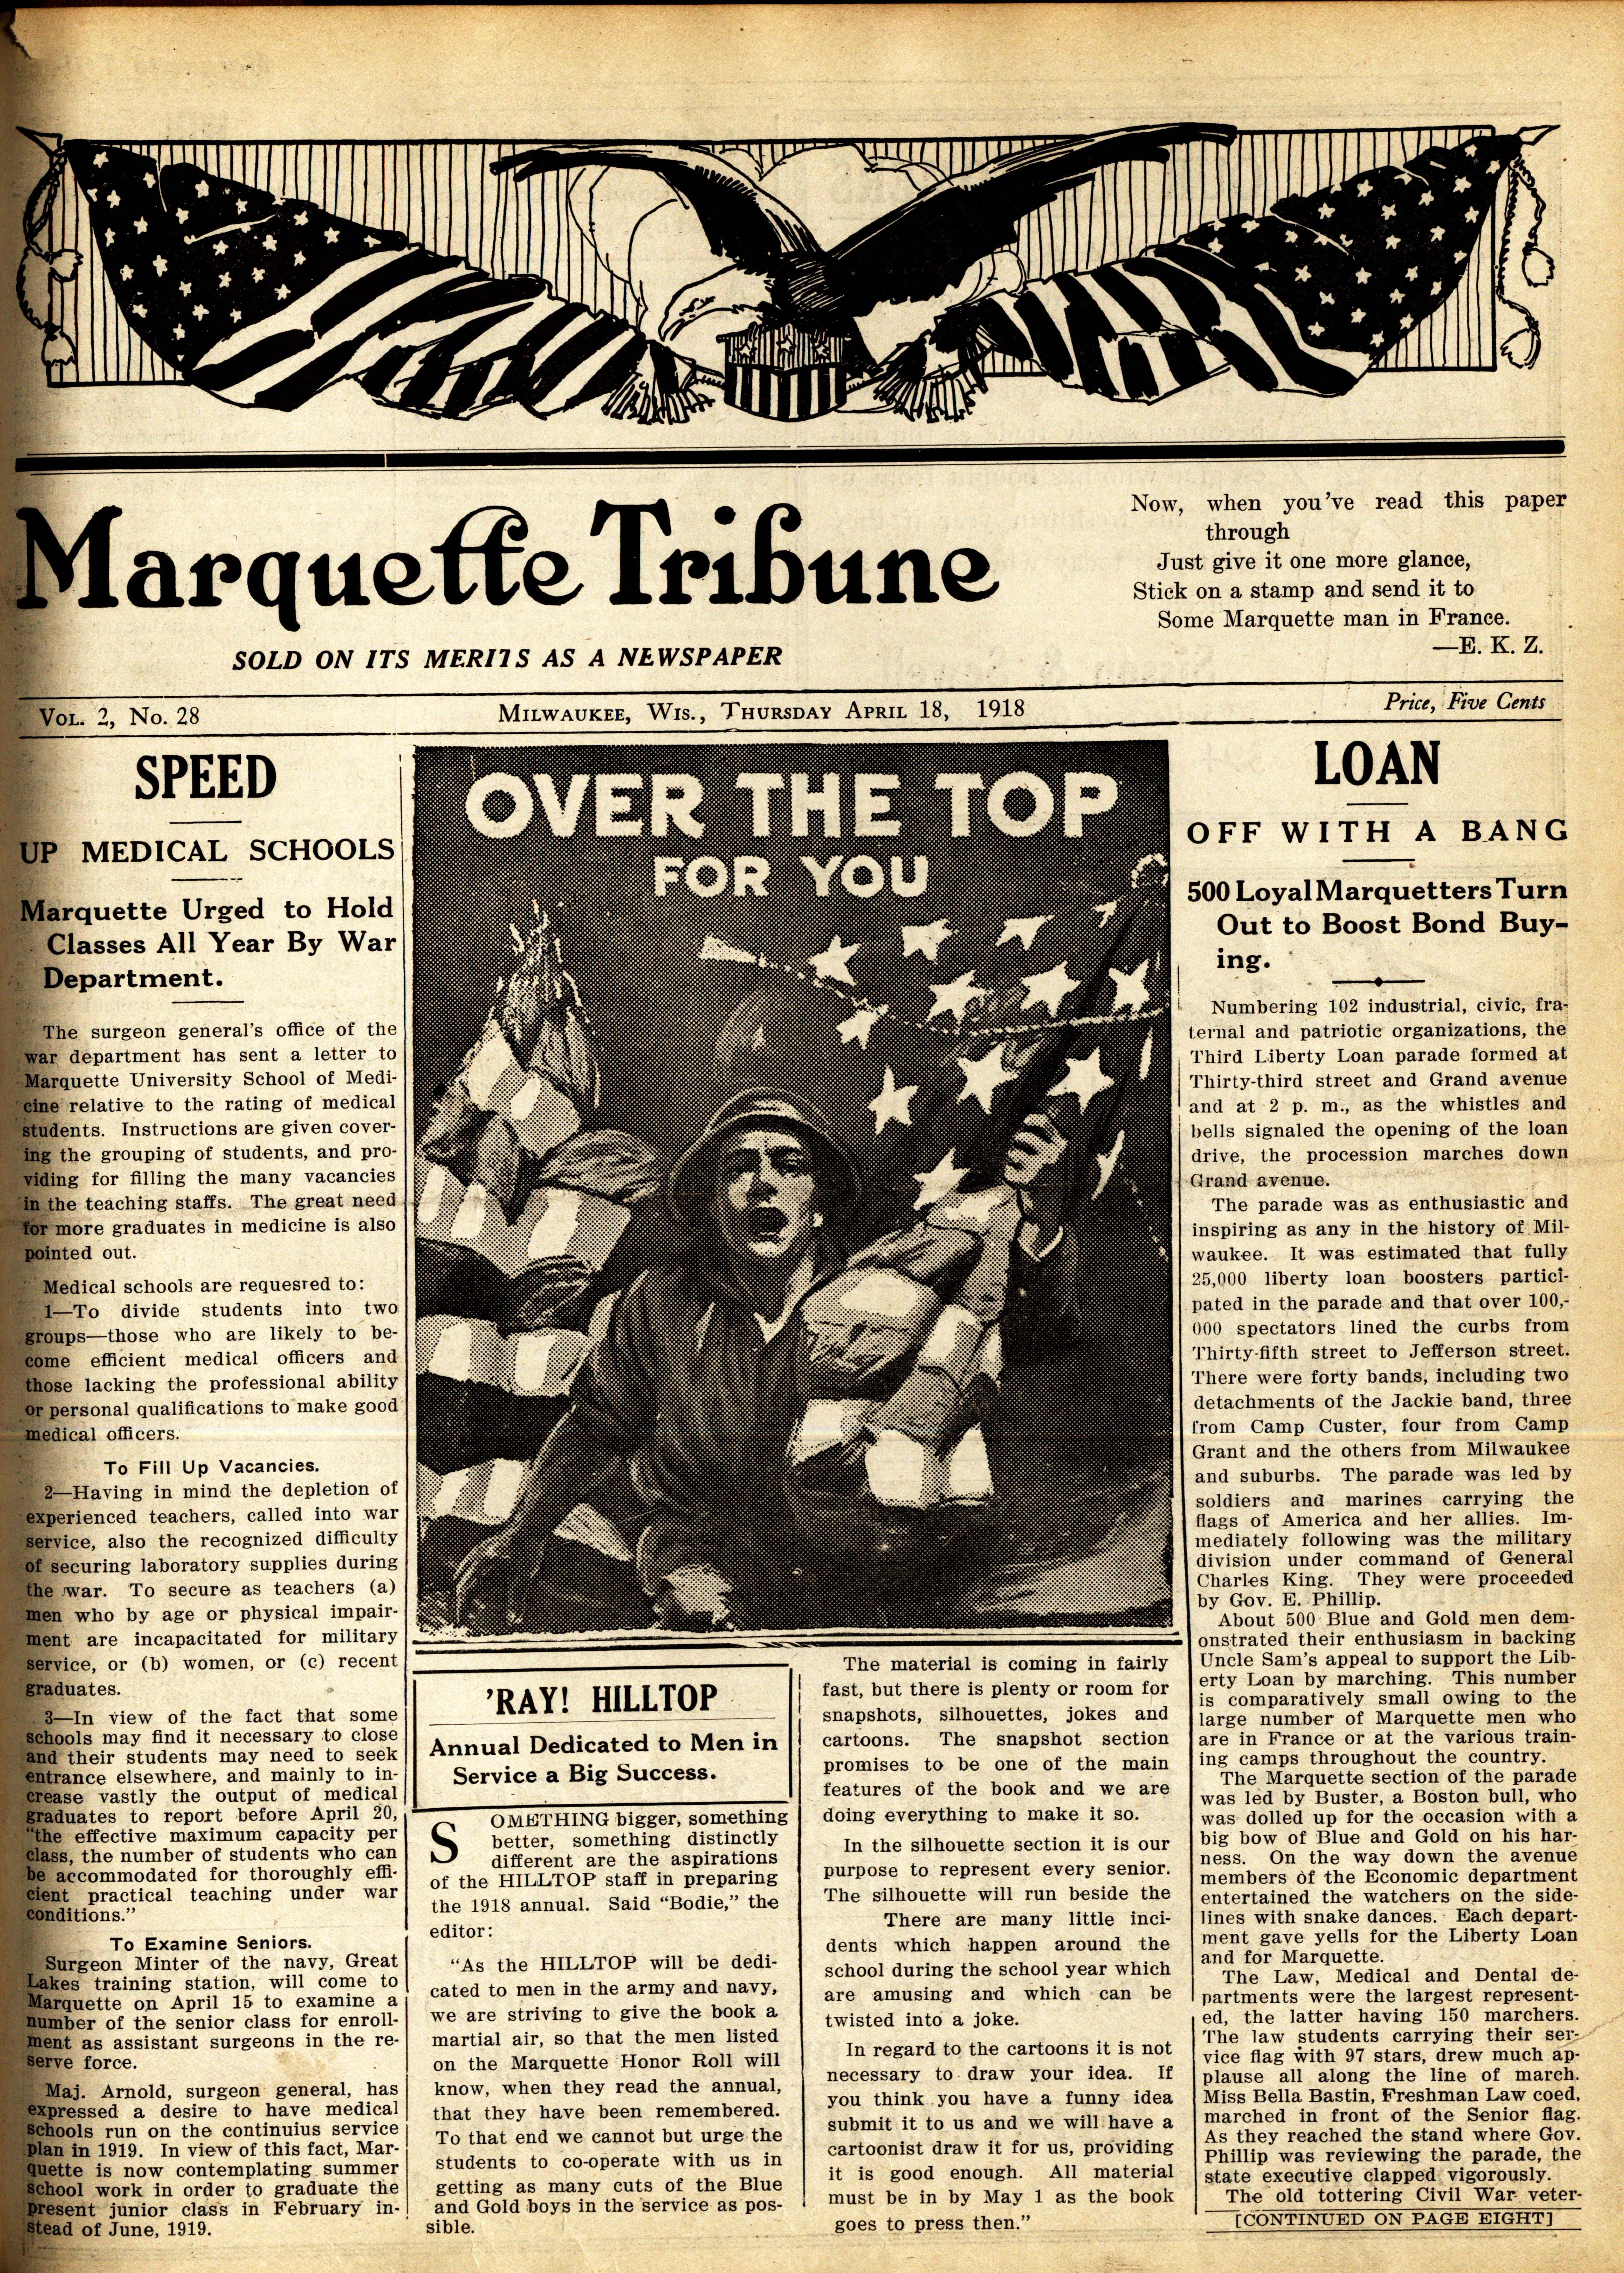 Tribune front page from April 18, 1918